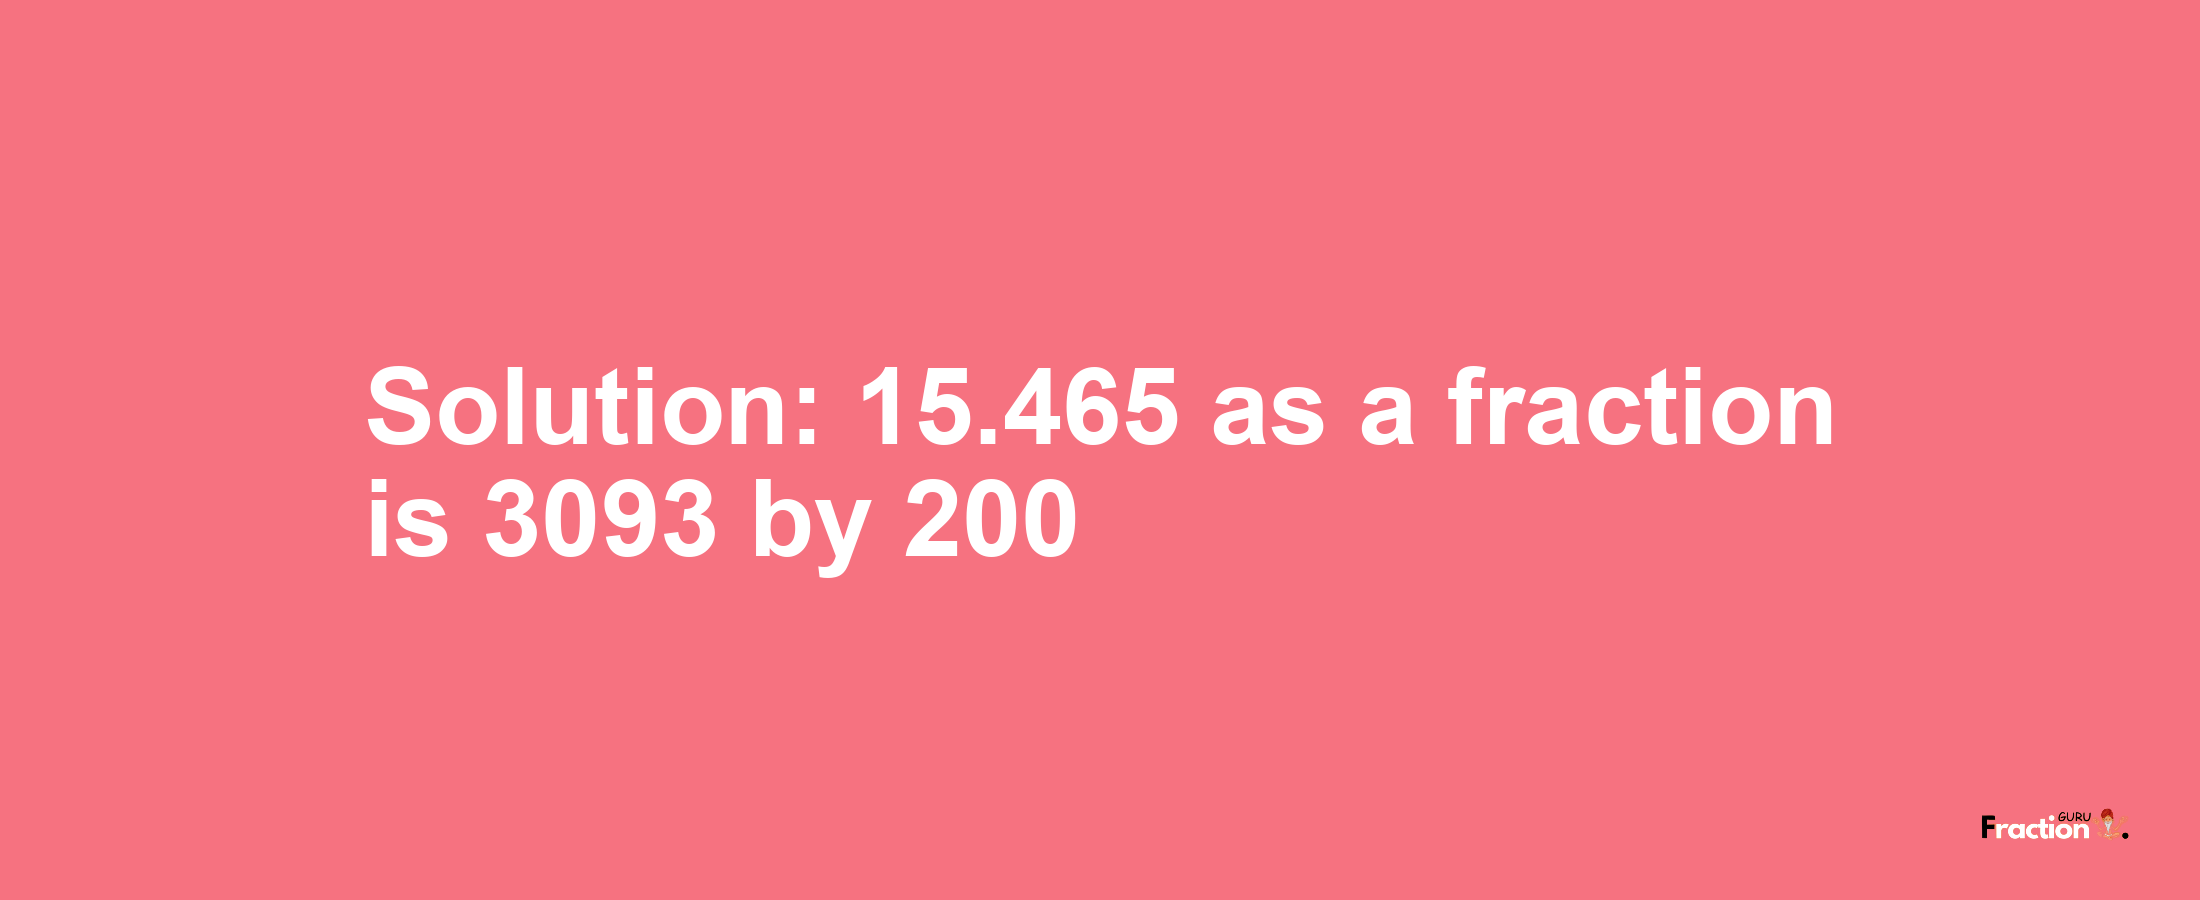 Solution:15.465 as a fraction is 3093/200